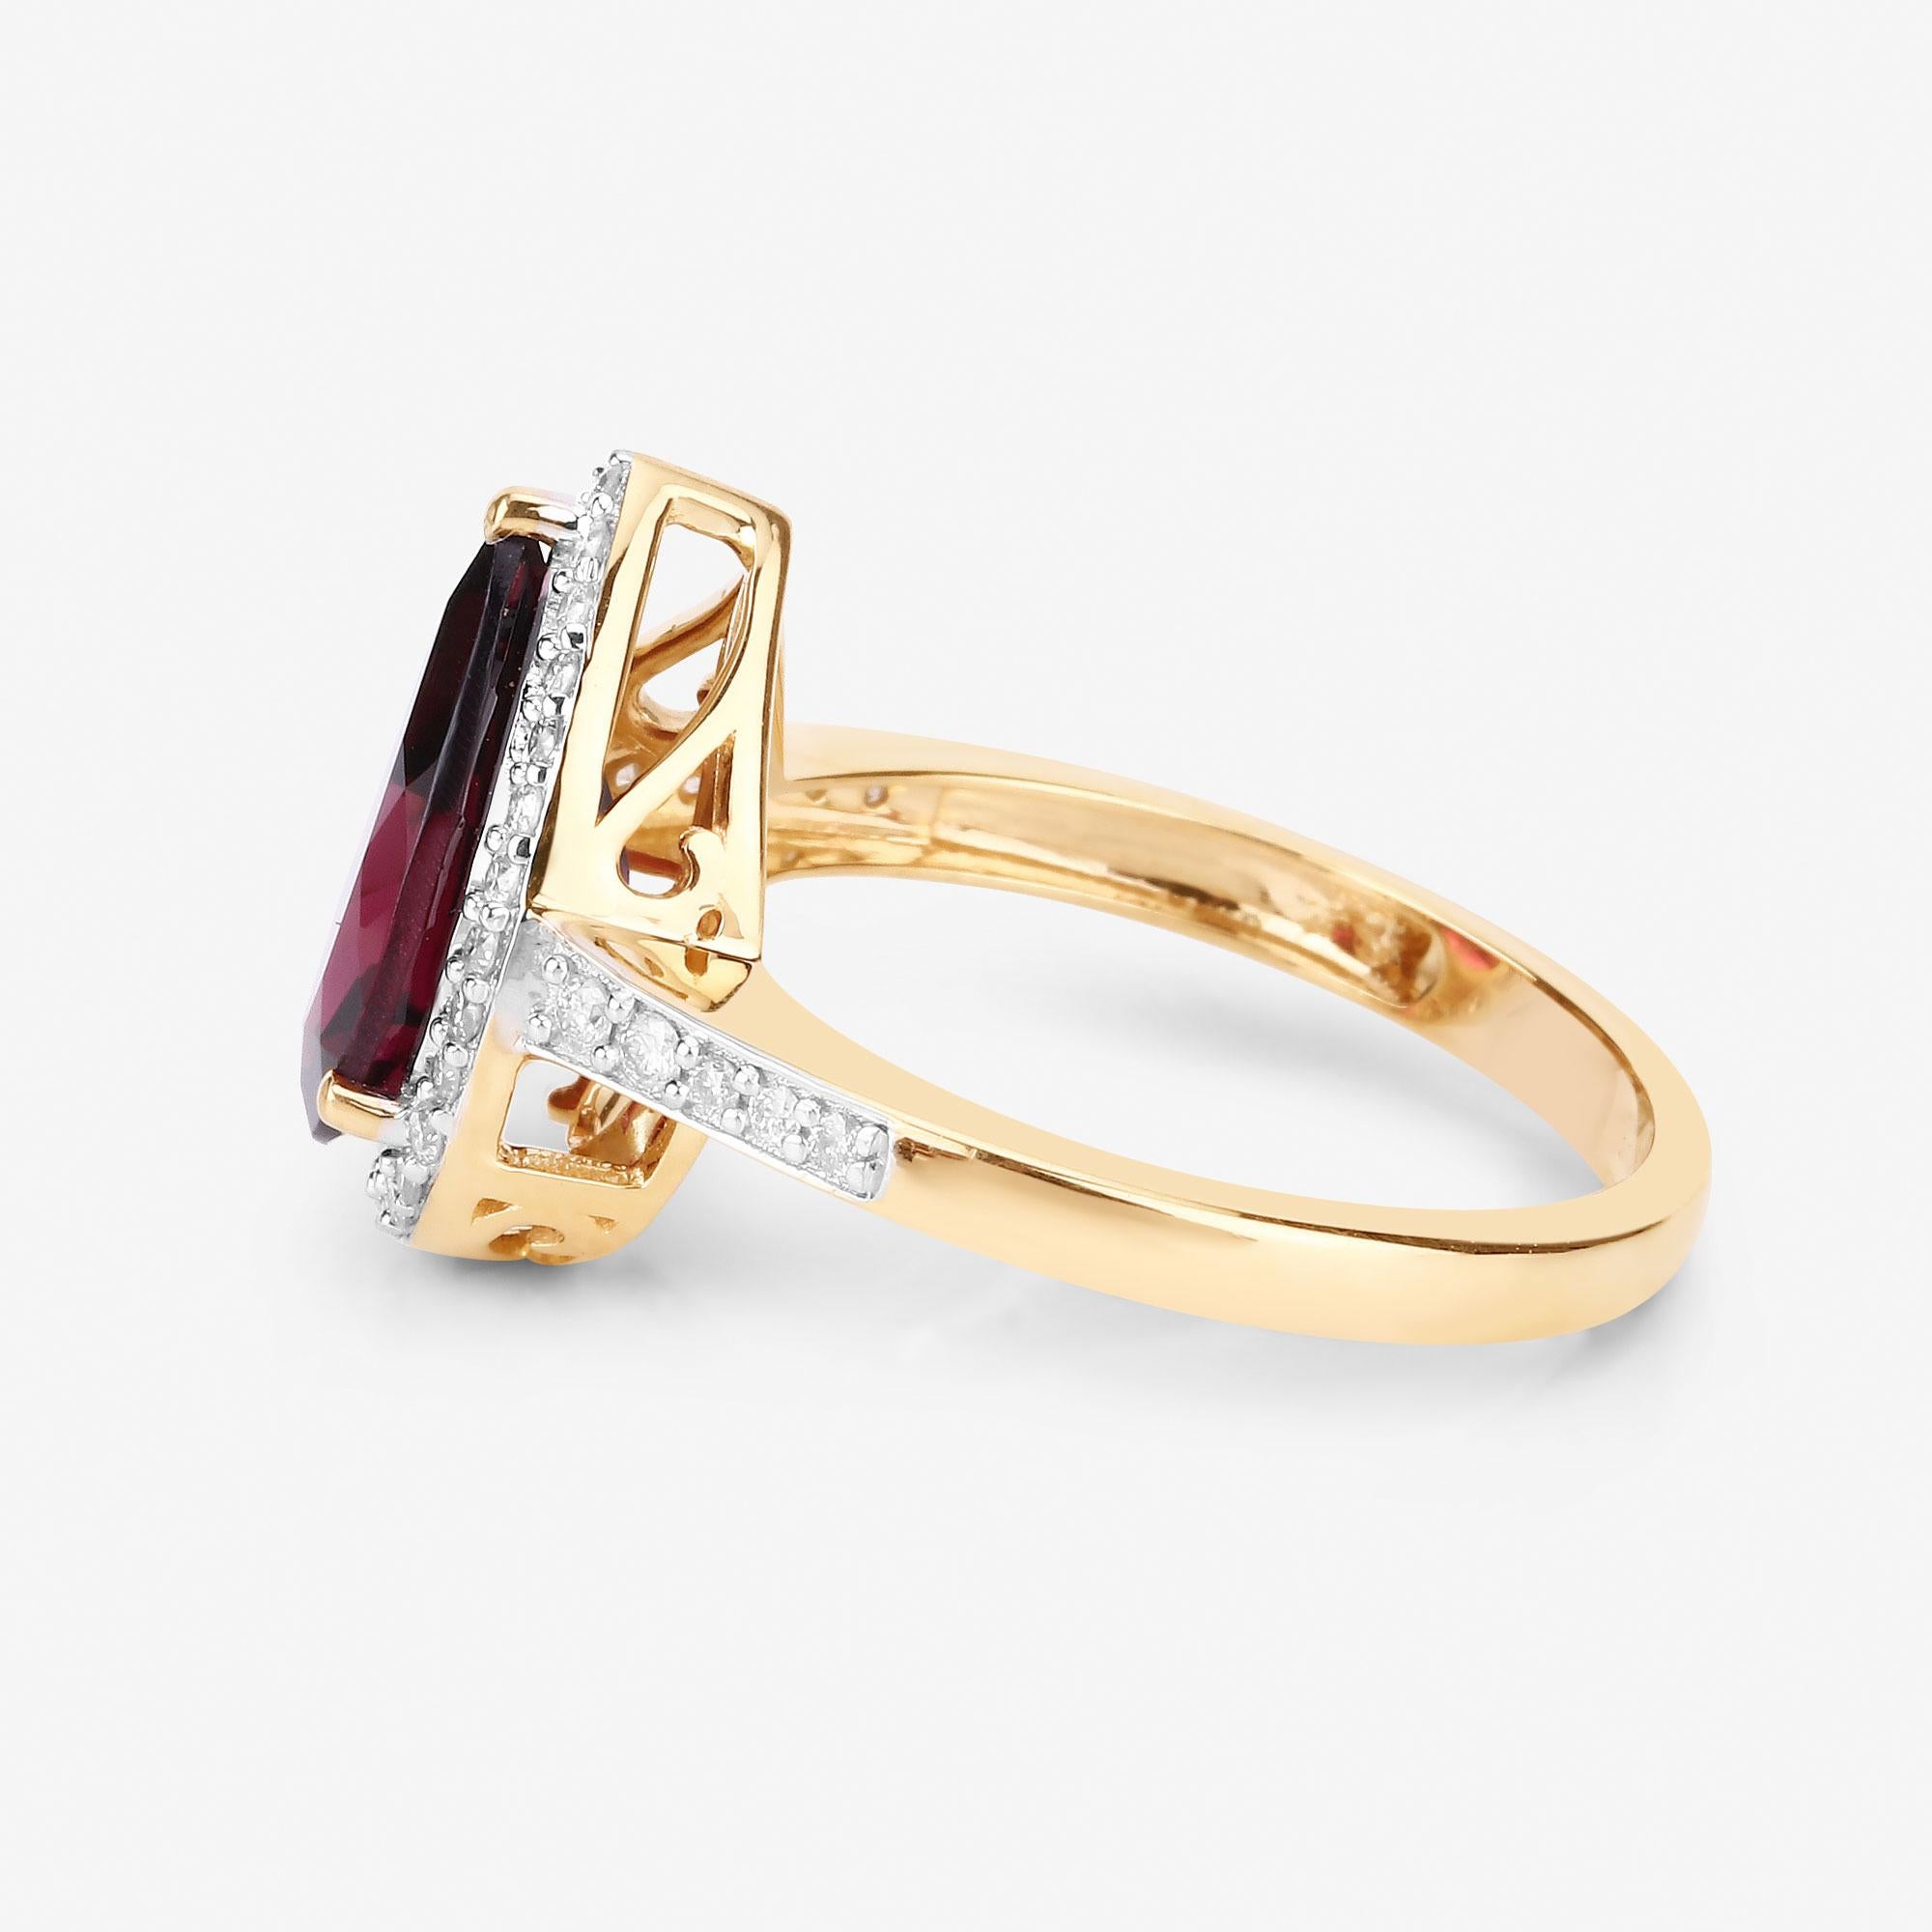 Rhodolite Garnet Cocktail Ring Diamond Setting 3.25 Carats 14K Yellow Gold In Excellent Condition For Sale In Laguna Niguel, CA